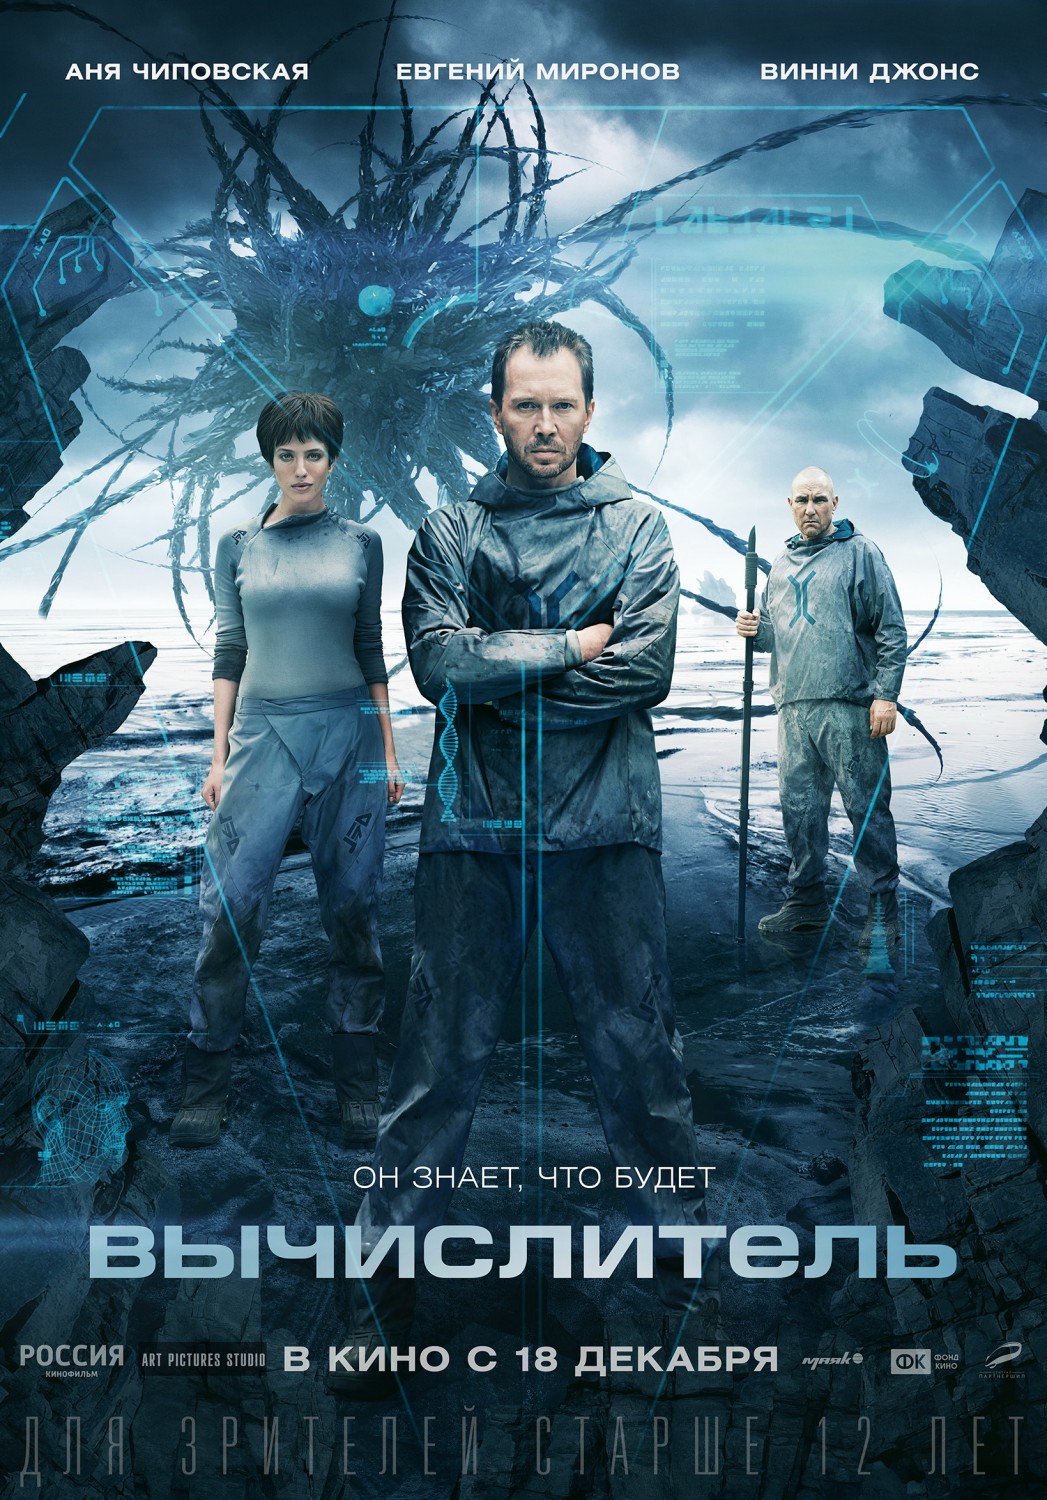 Extra Large Movie Poster Image for Vychislitel (#4 of 4)